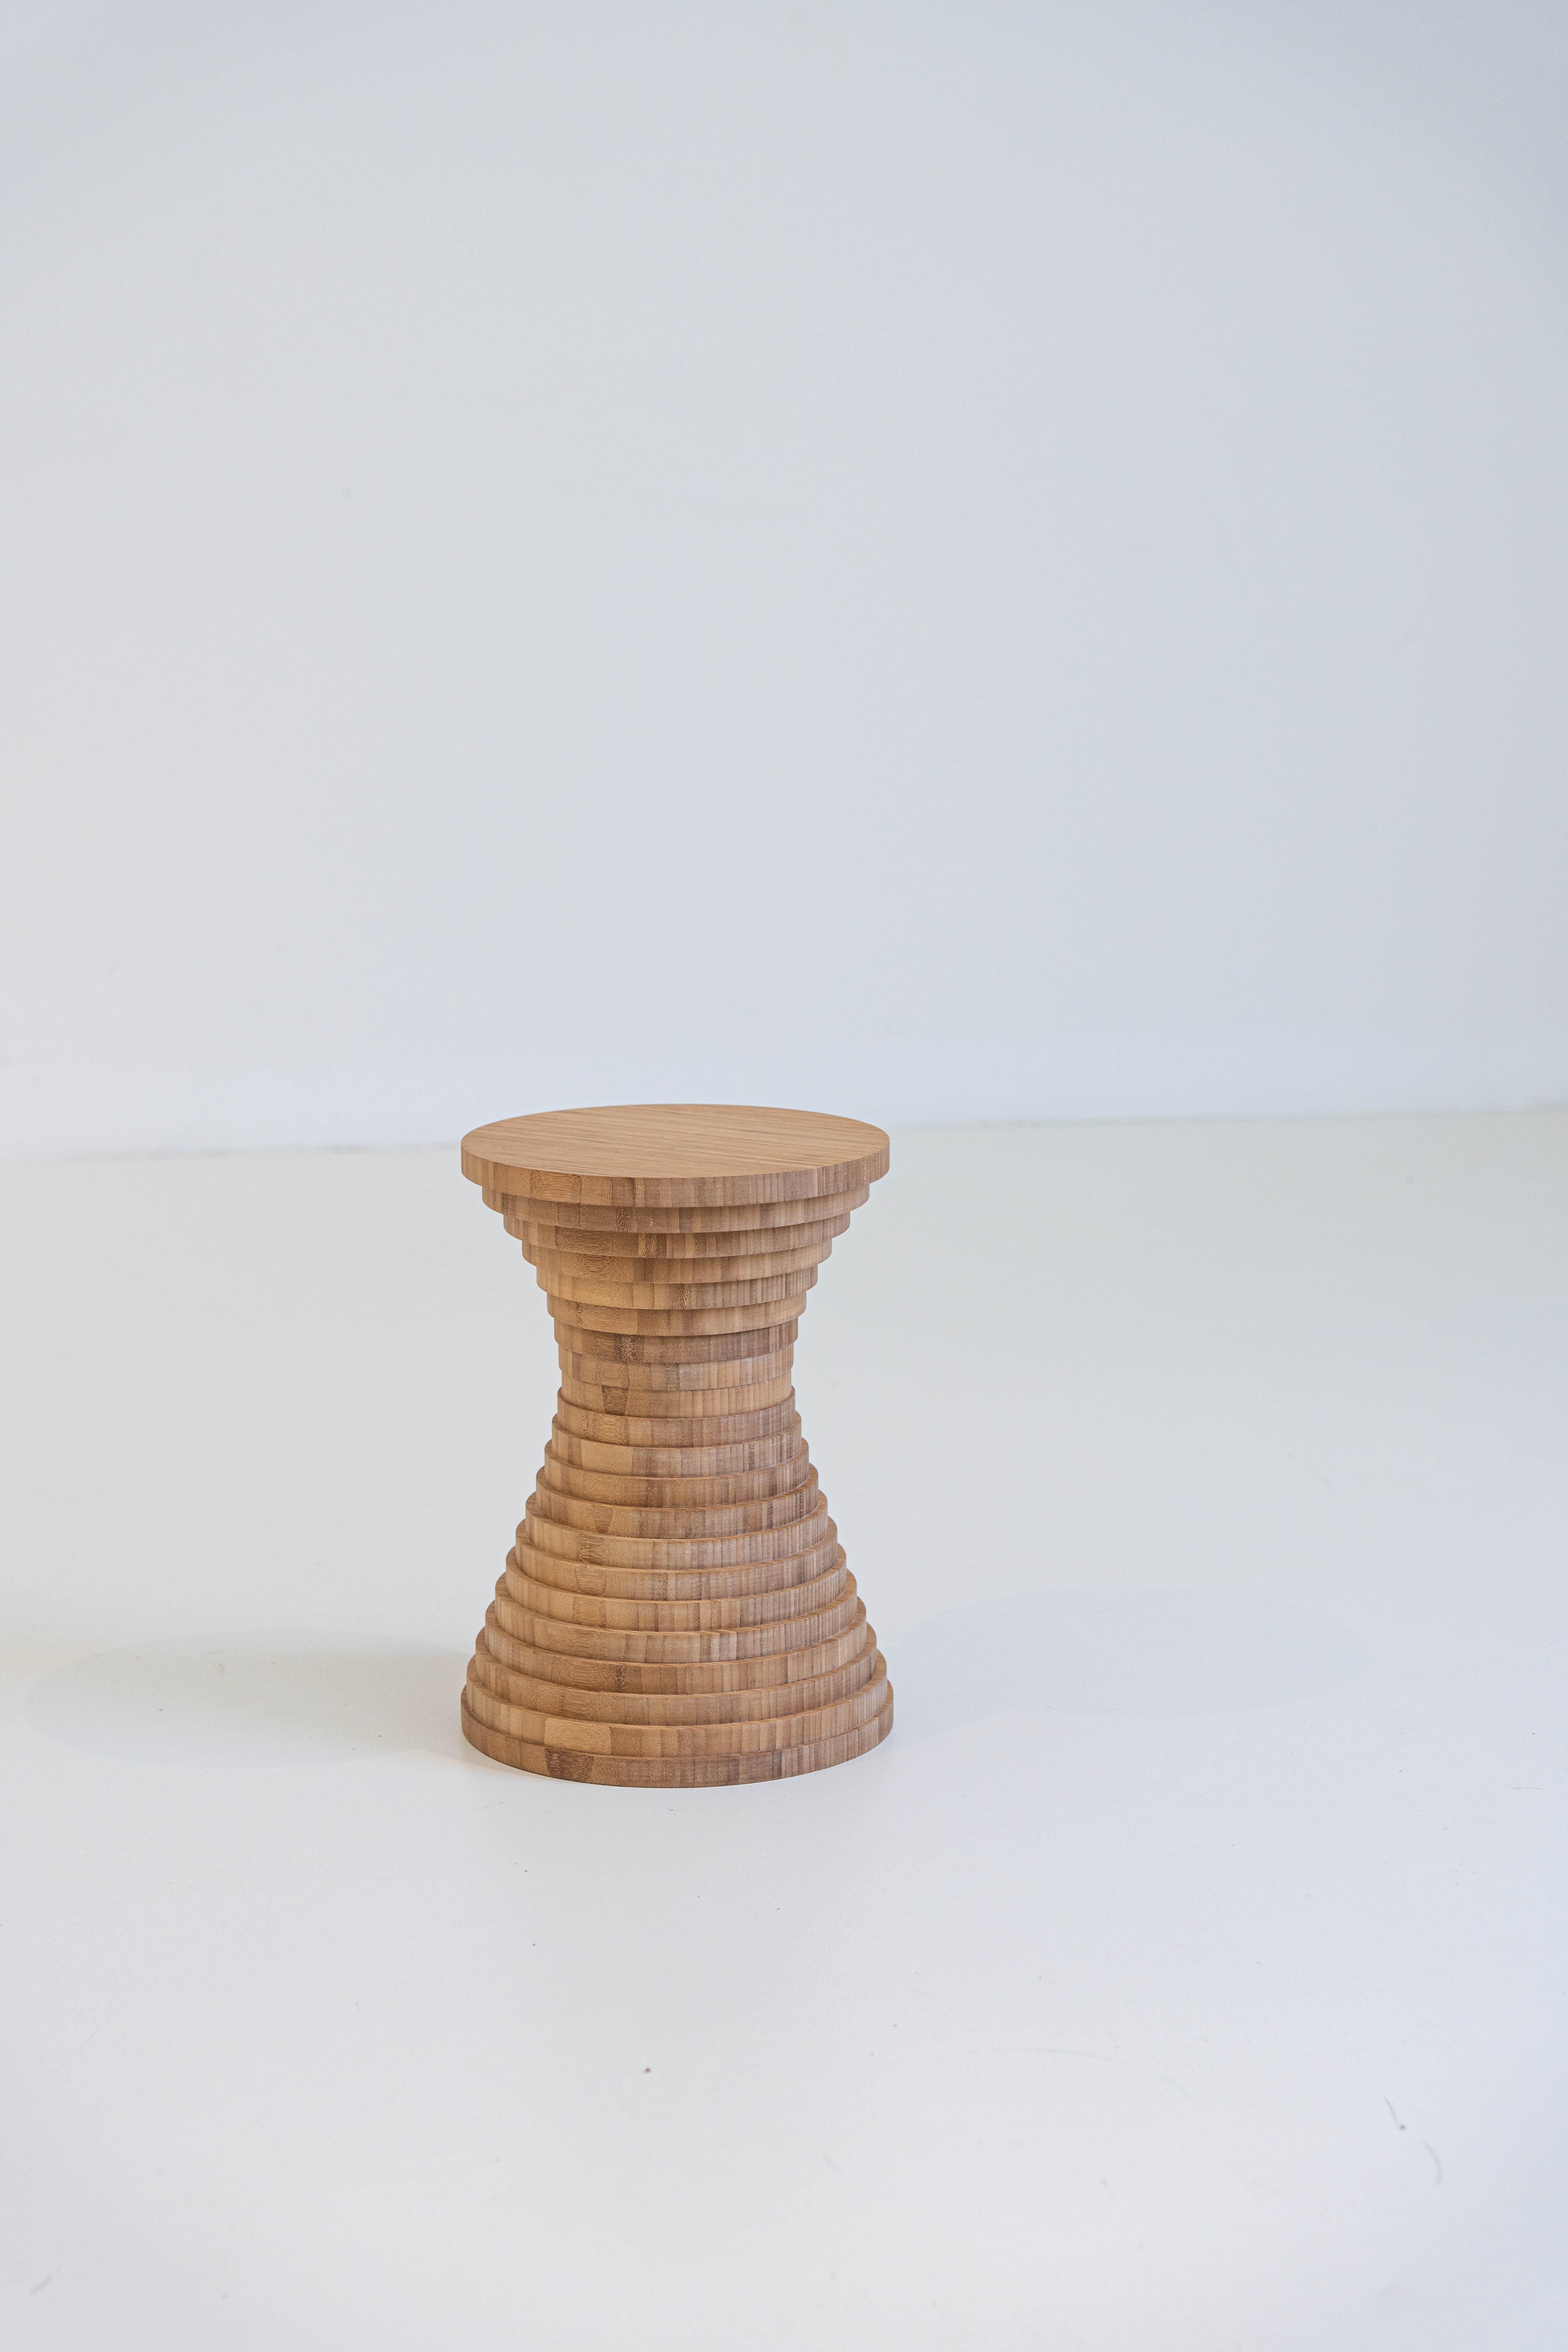 Stratum Basim Bamboo Stool by Daan De Wit
Numbered Edition
Dimensions: D 31 x H 44 cm.
Materials: Bamboo.
Also available in other materials.

This time the focus is on marble and more specifically the costly and irreversible waste of a product that